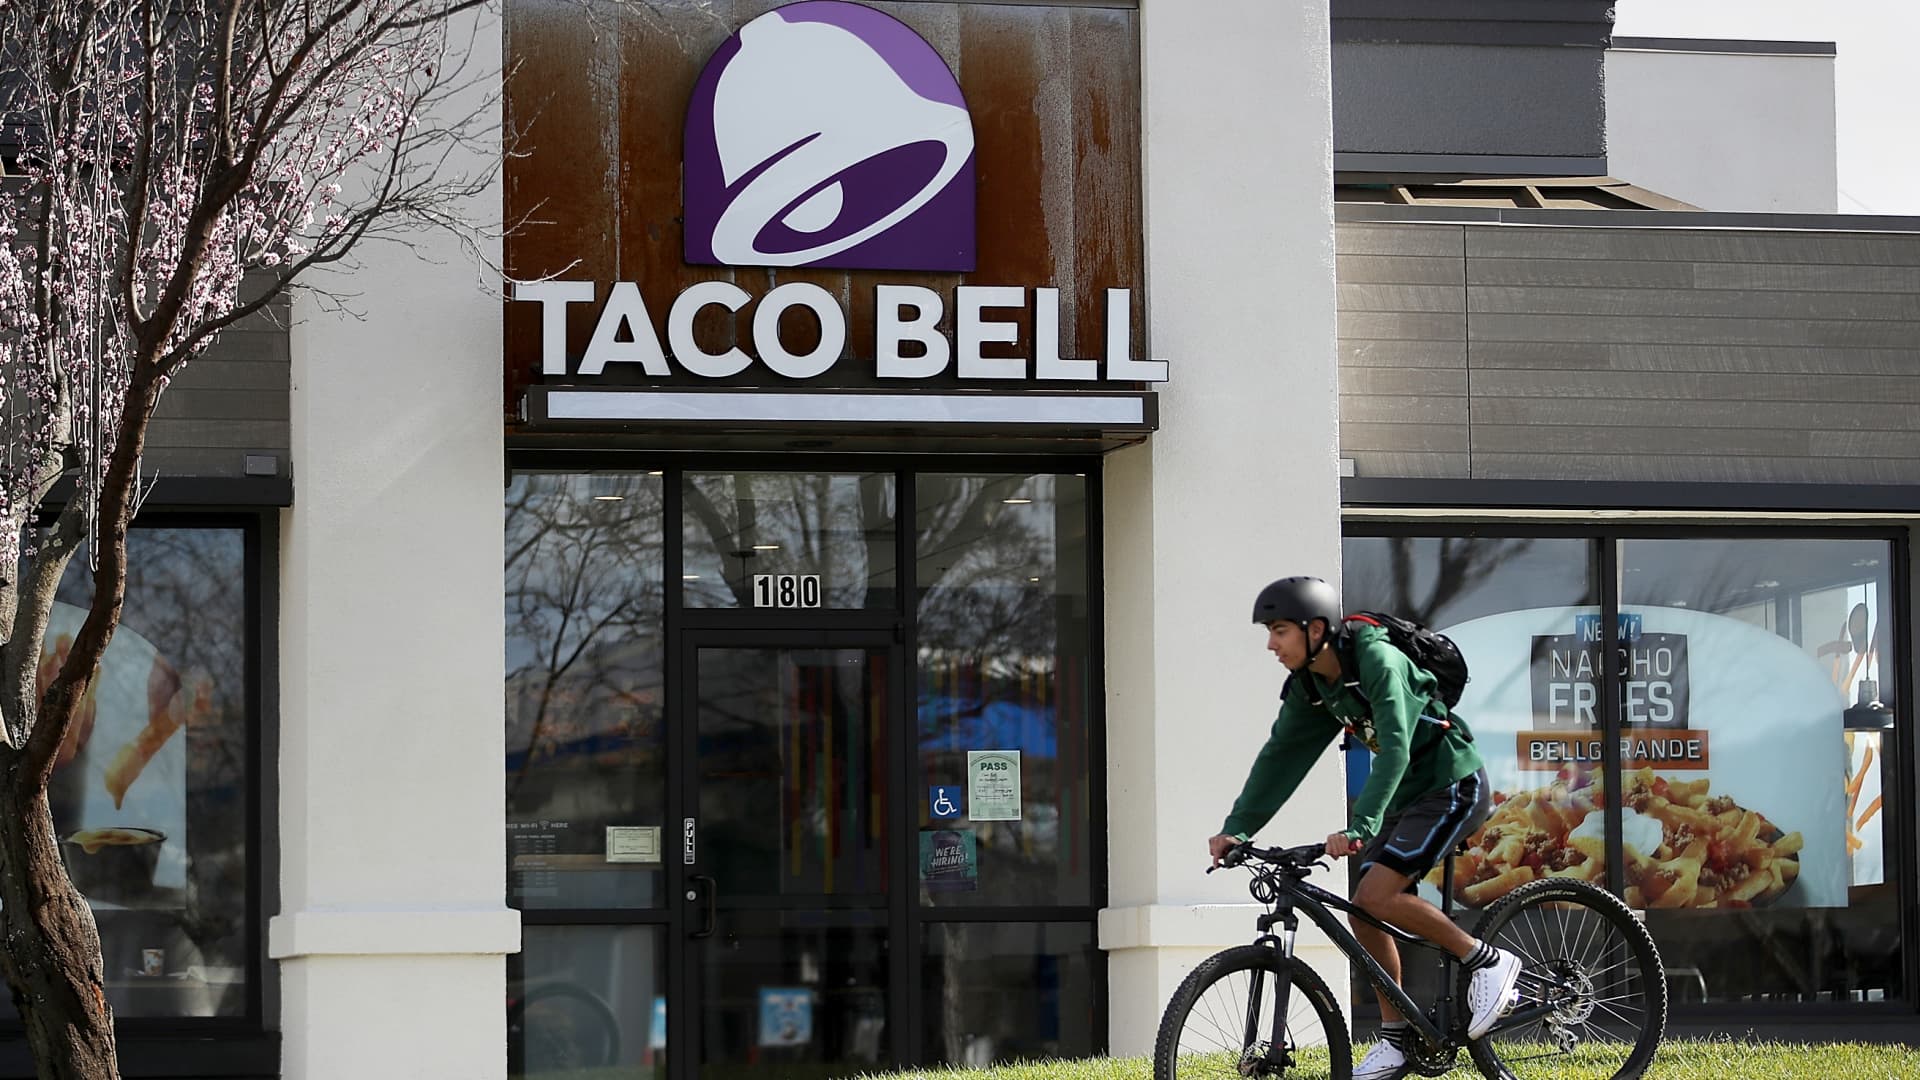 Taco Bell removes Mexican Pizza and other items as it finishes menu streamlining